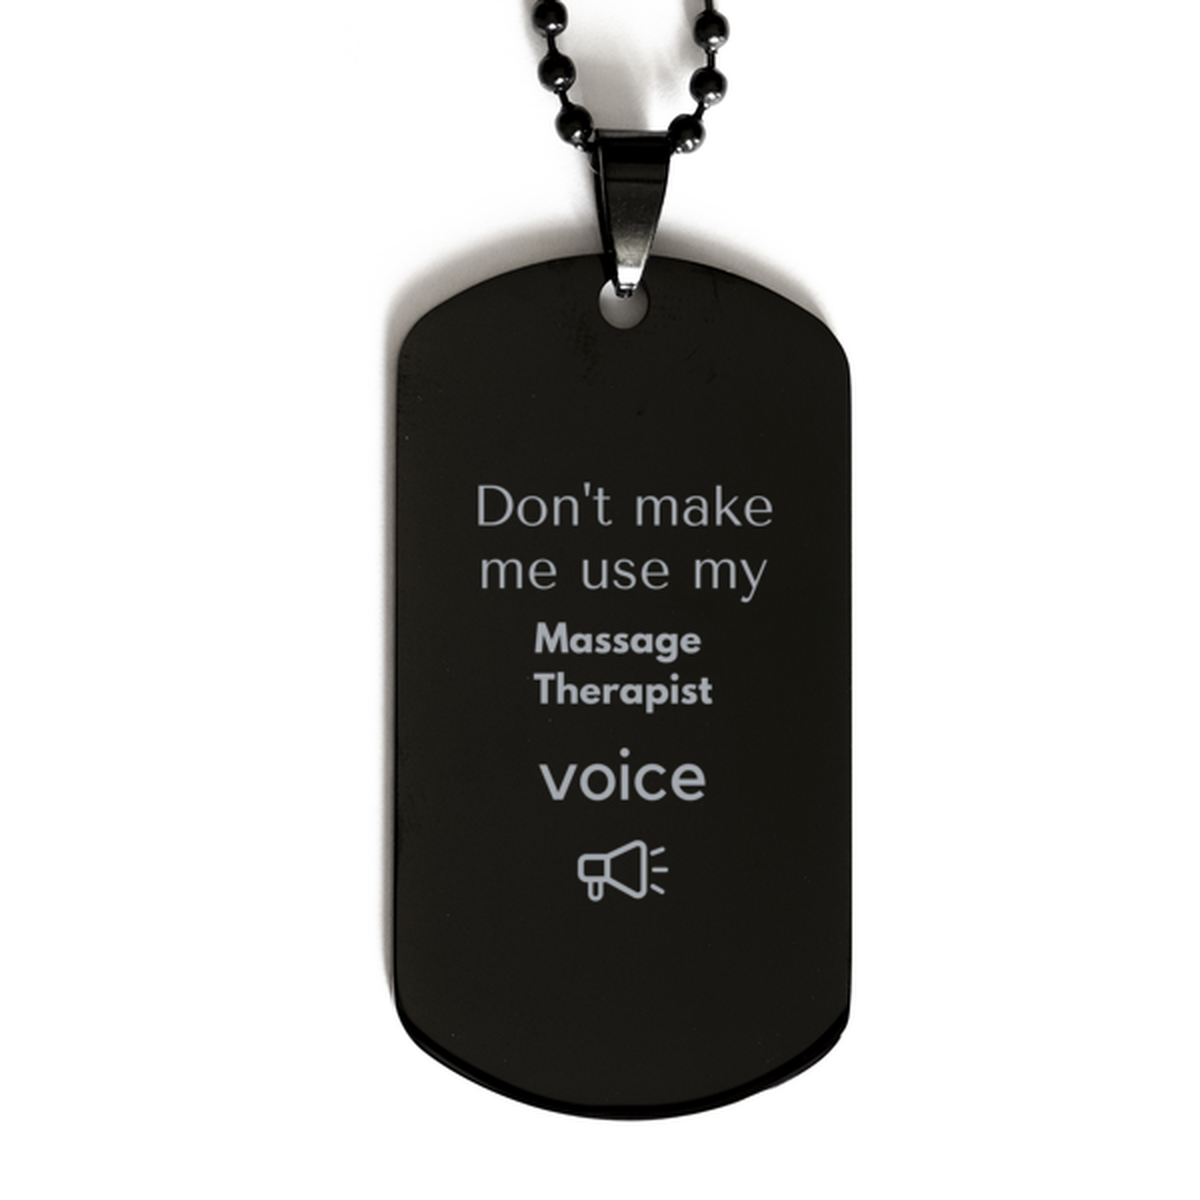 Don't make me use my Massage Therapist voice, Sarcasm Massage Therapist Gifts, Christmas Massage Therapist Black Dog Tag Birthday Unique Gifts For Massage Therapist Coworkers, Men, Women, Colleague, Friends